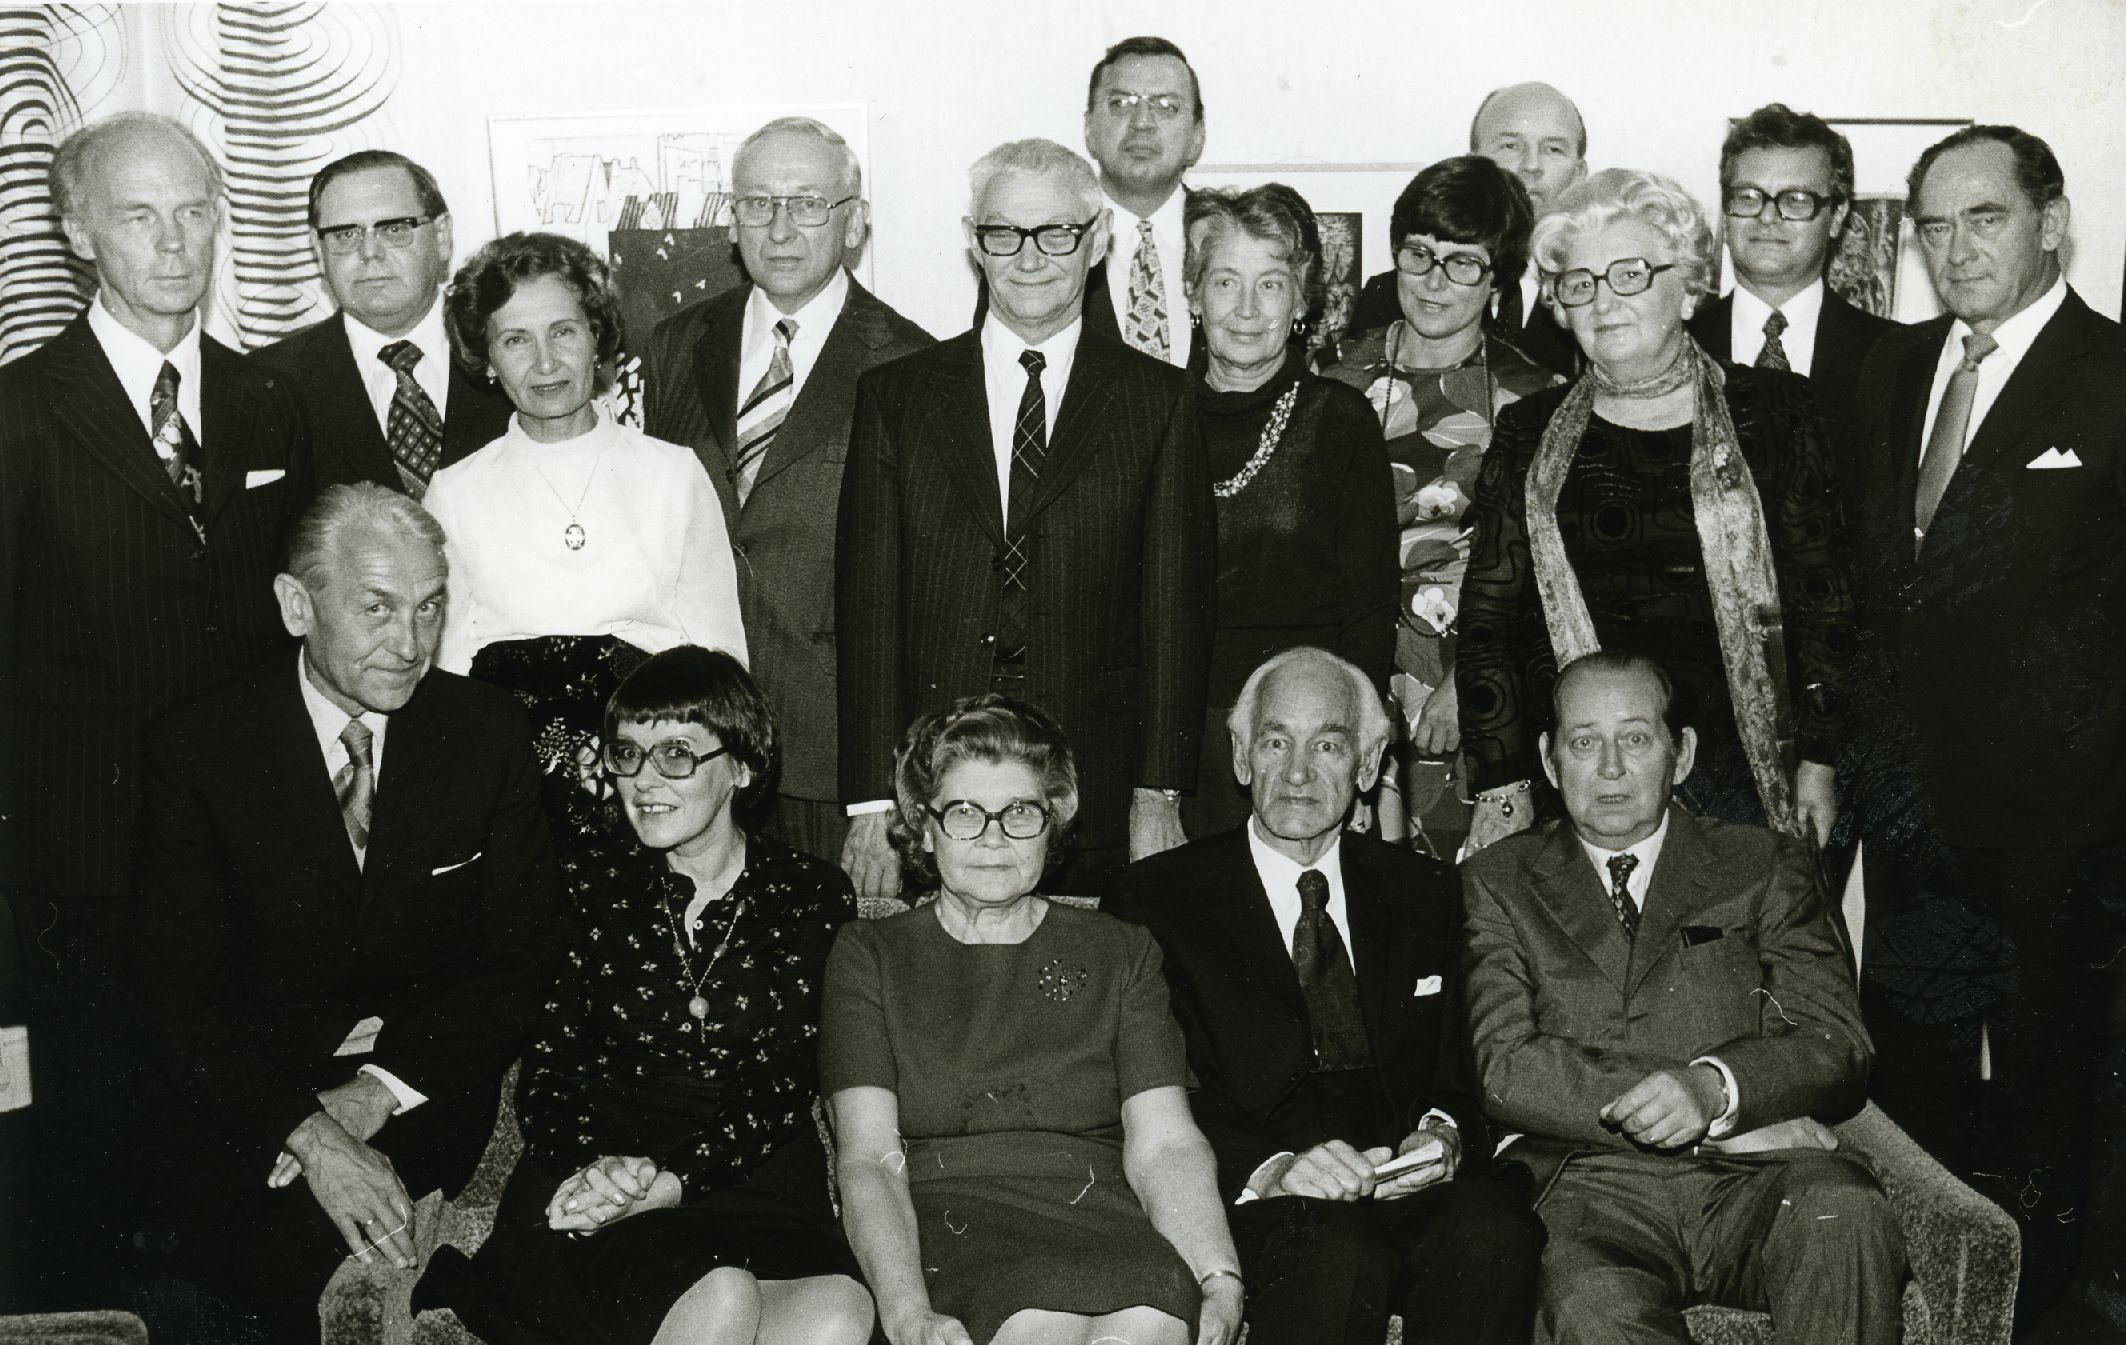 August Mälgu 75th birthday at the Estonian House on October 4. 1975 a